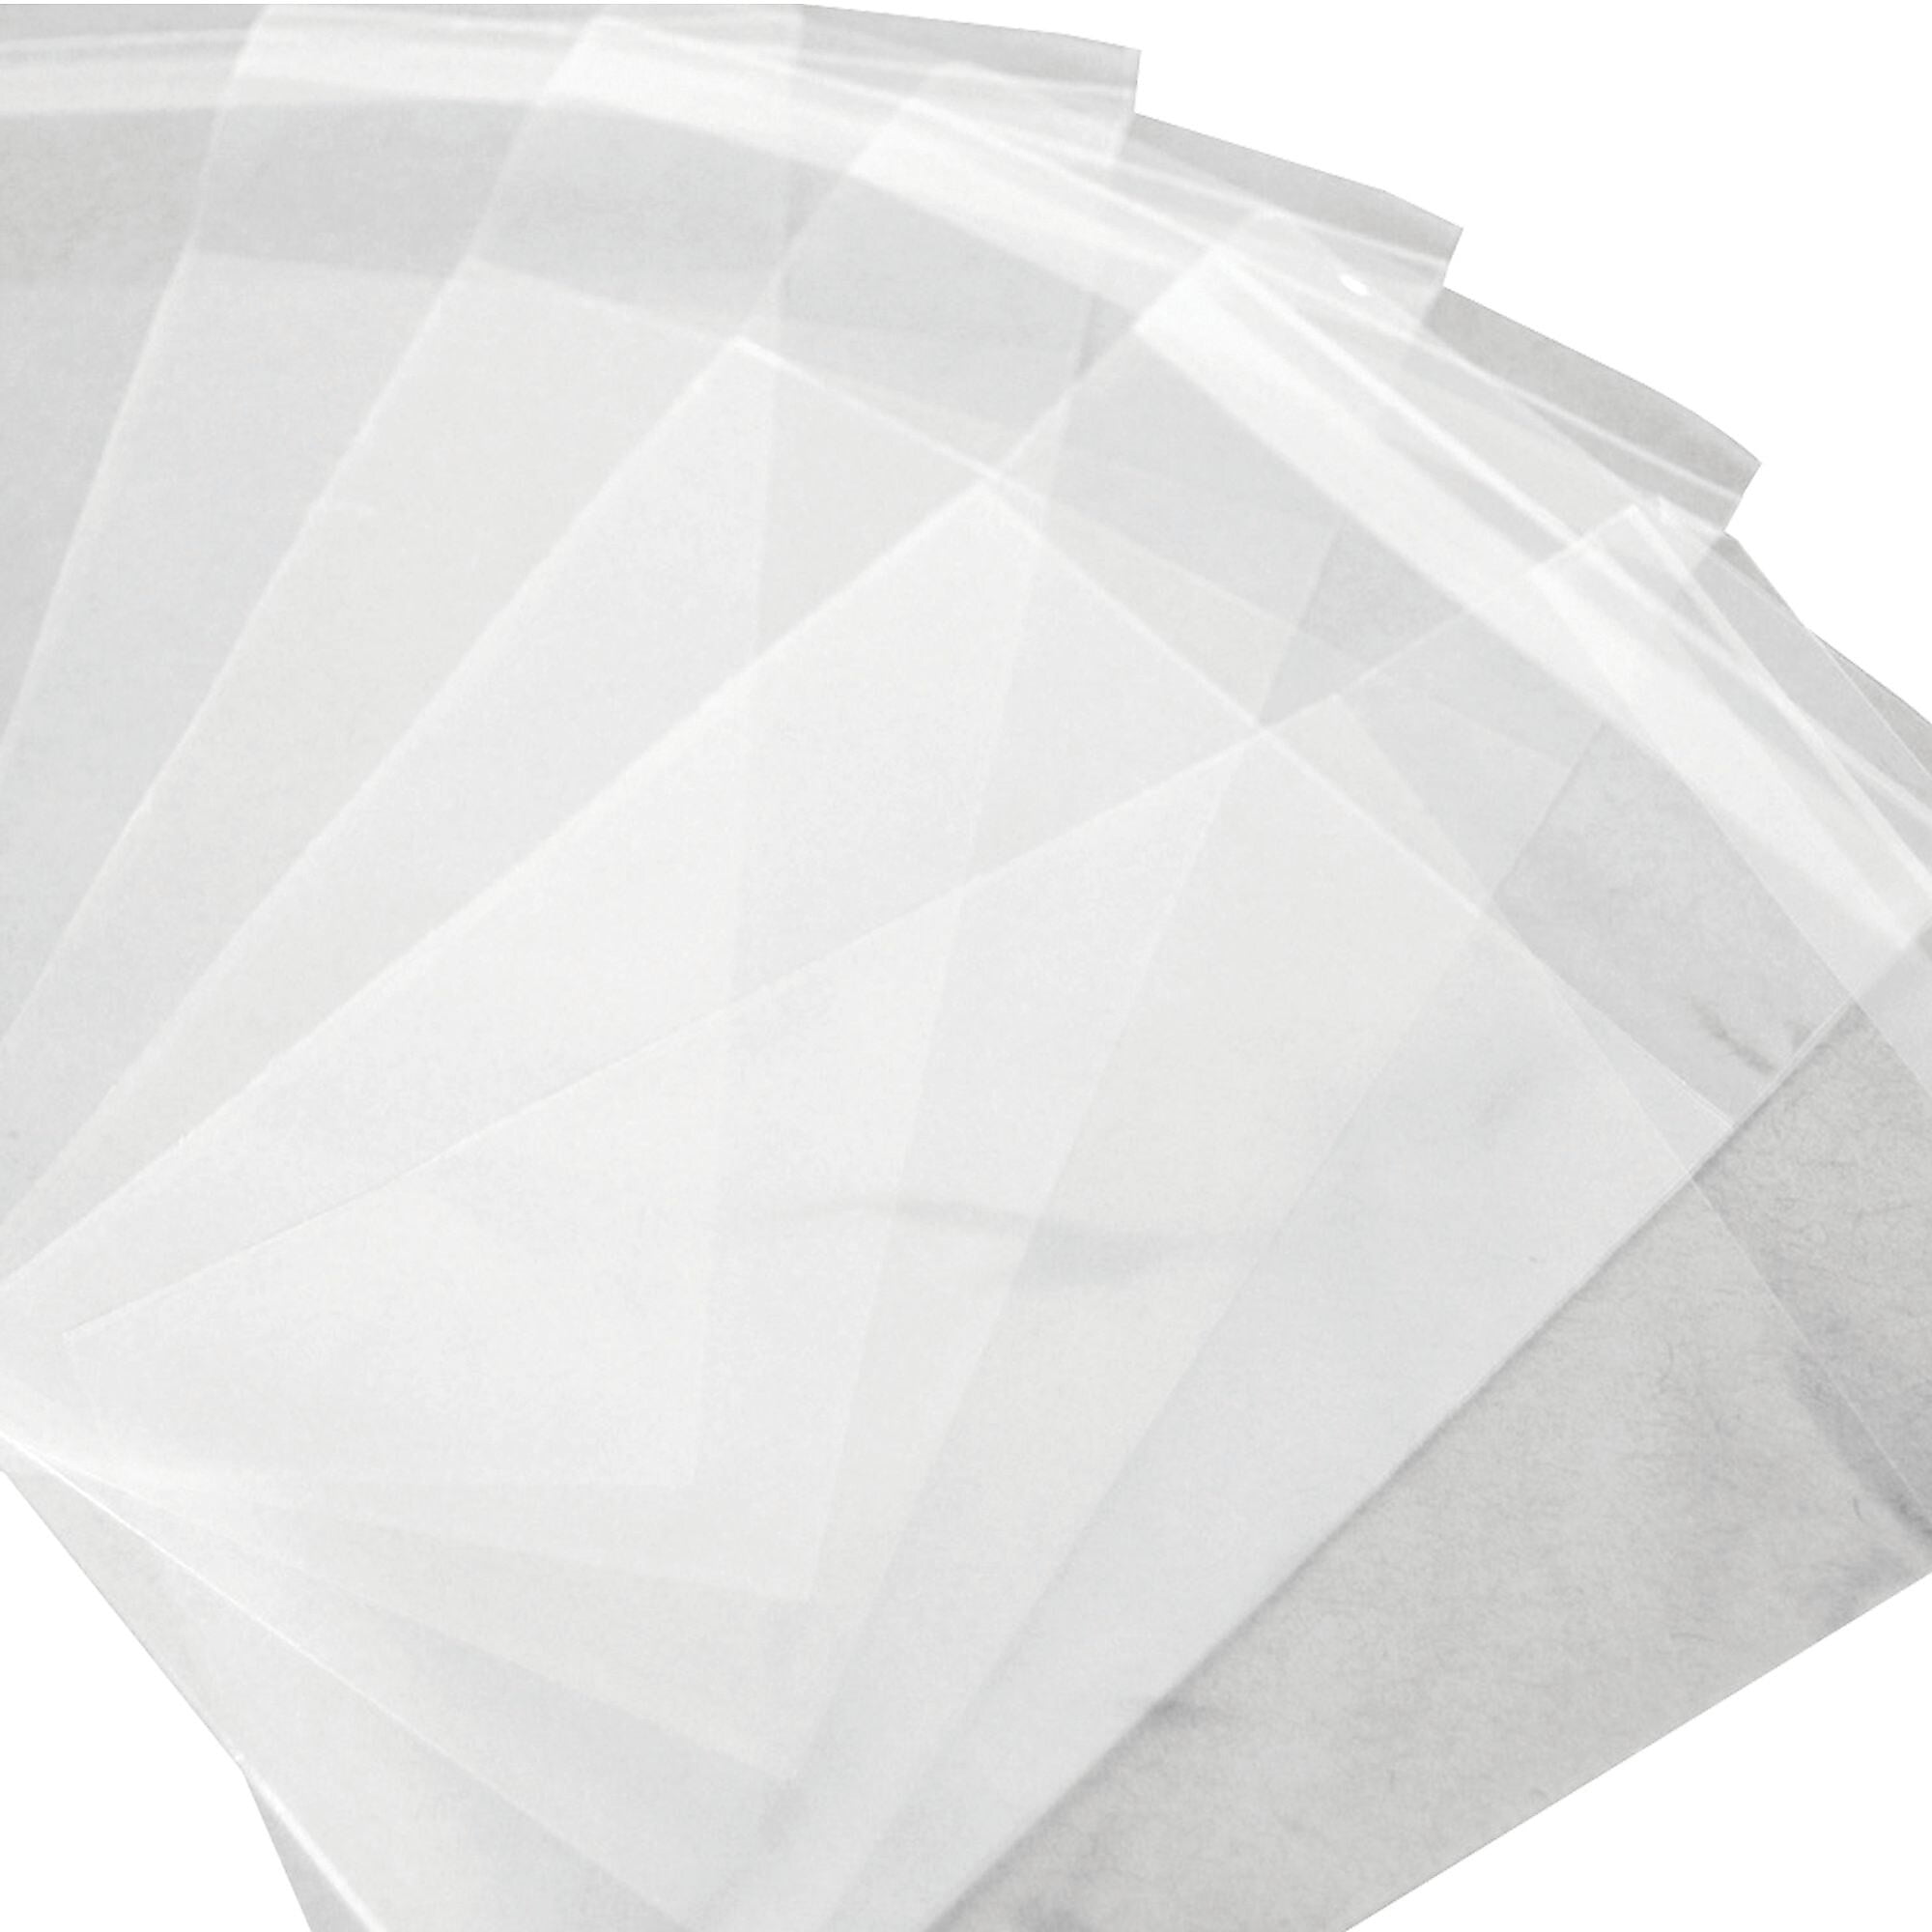 100 x 12" x 15" Clear Display Garment Cover Polypropylene Resealable Bags 